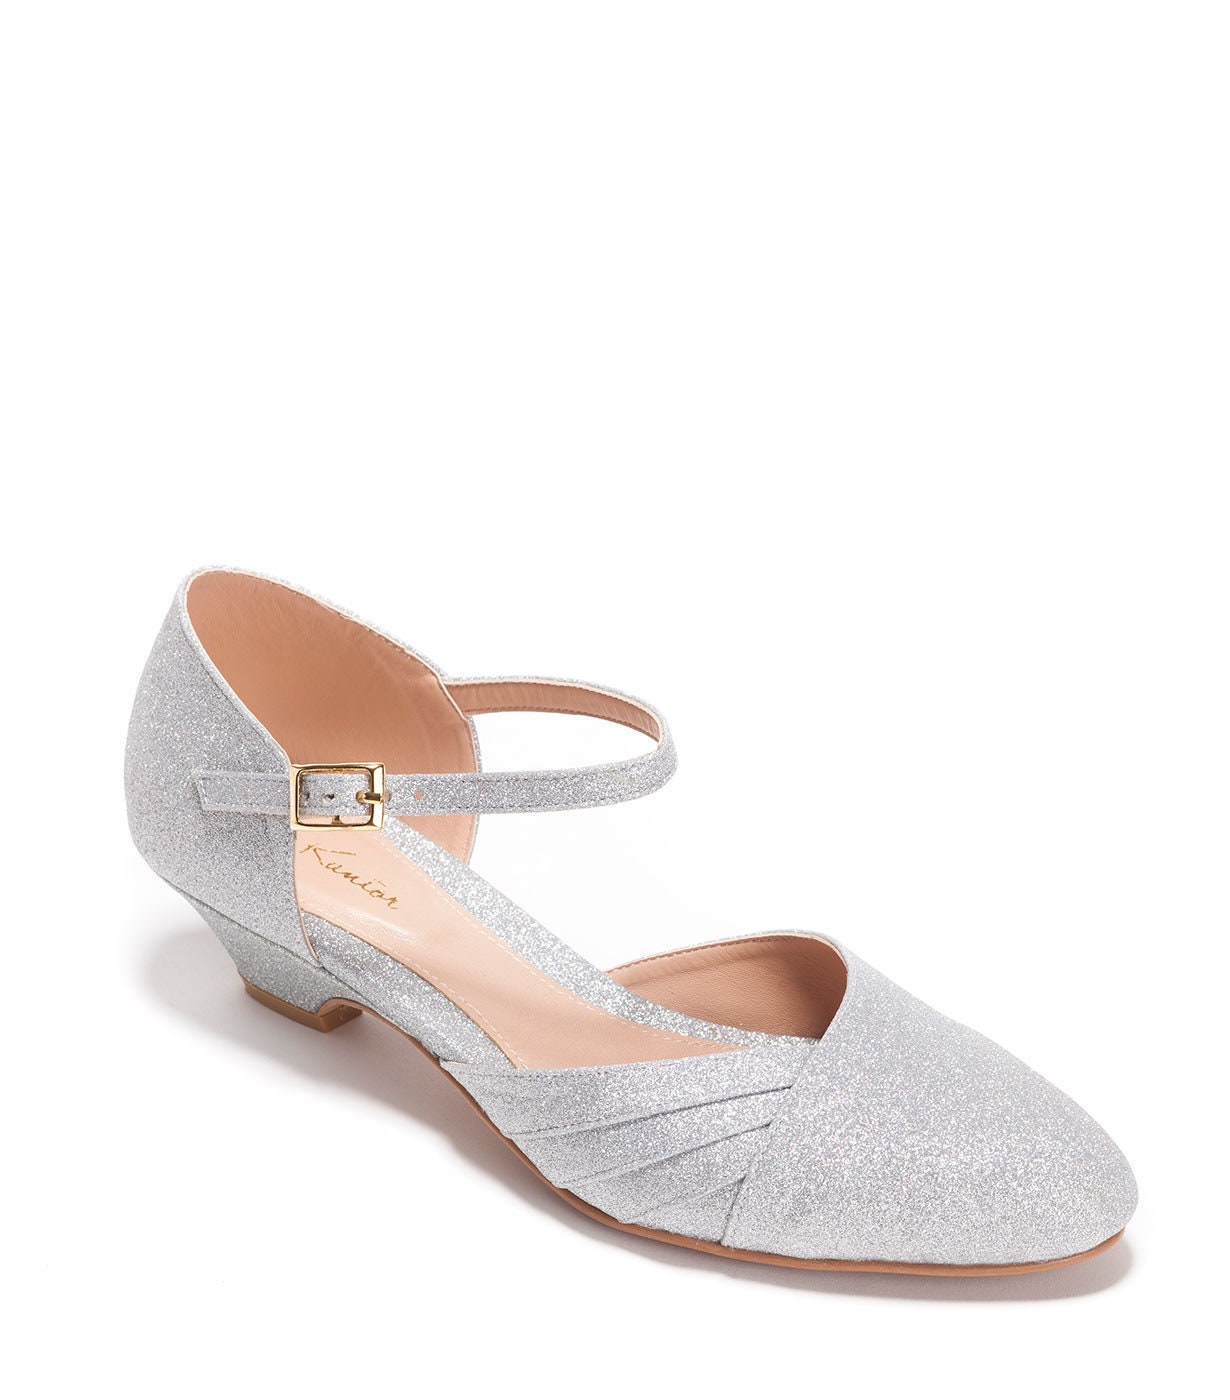 Glamorous Silver Mary Jane Shoes For Women, Faux Pearl Decor Flats